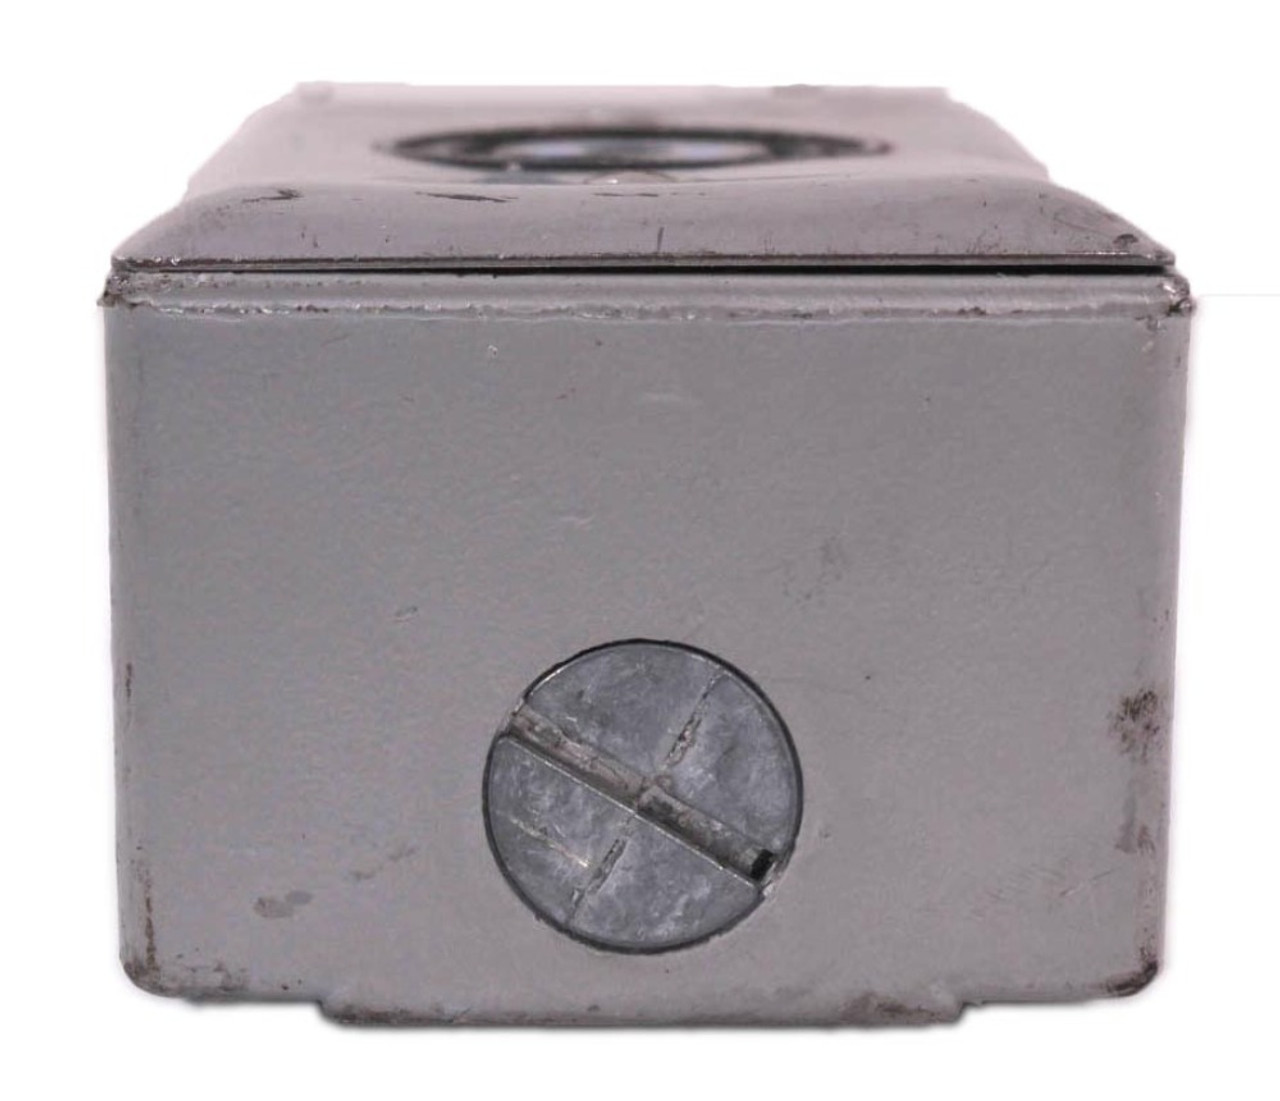 Hubbell Twist Lock Receptacle 30A 250V